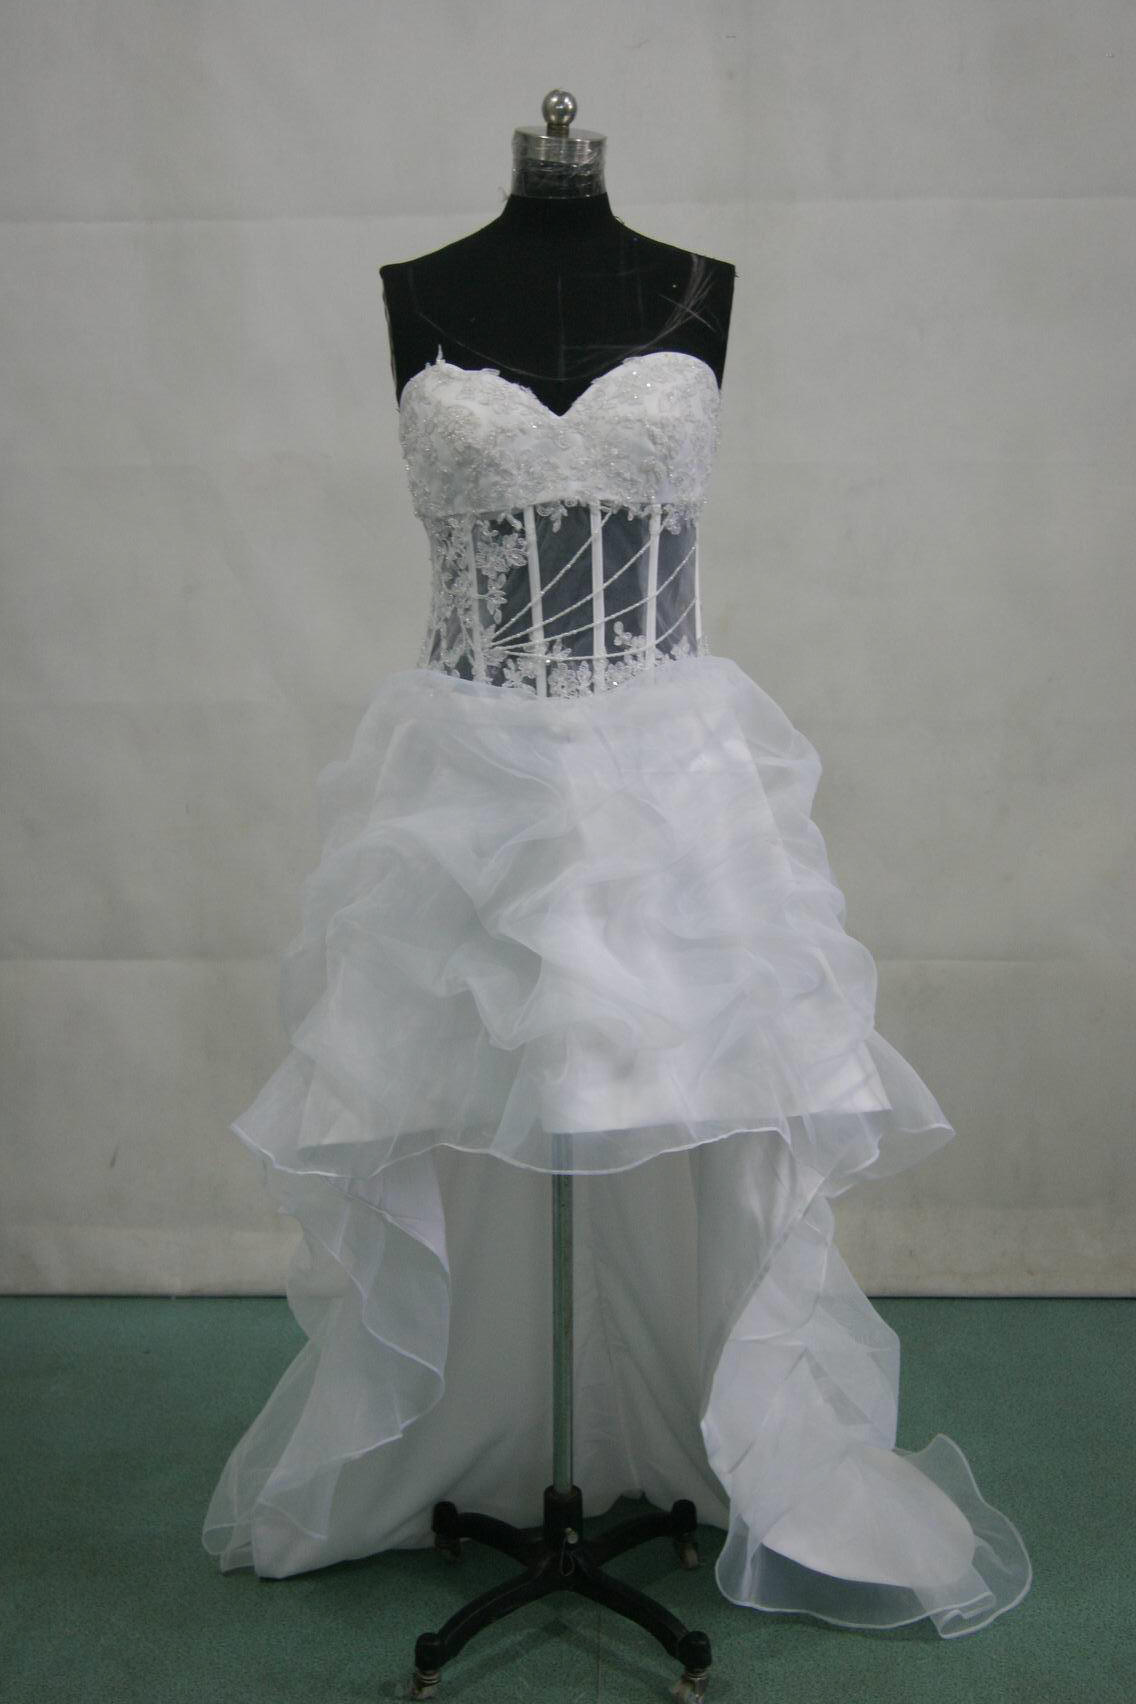 white dress with see through bodice, corset tie back and a small train